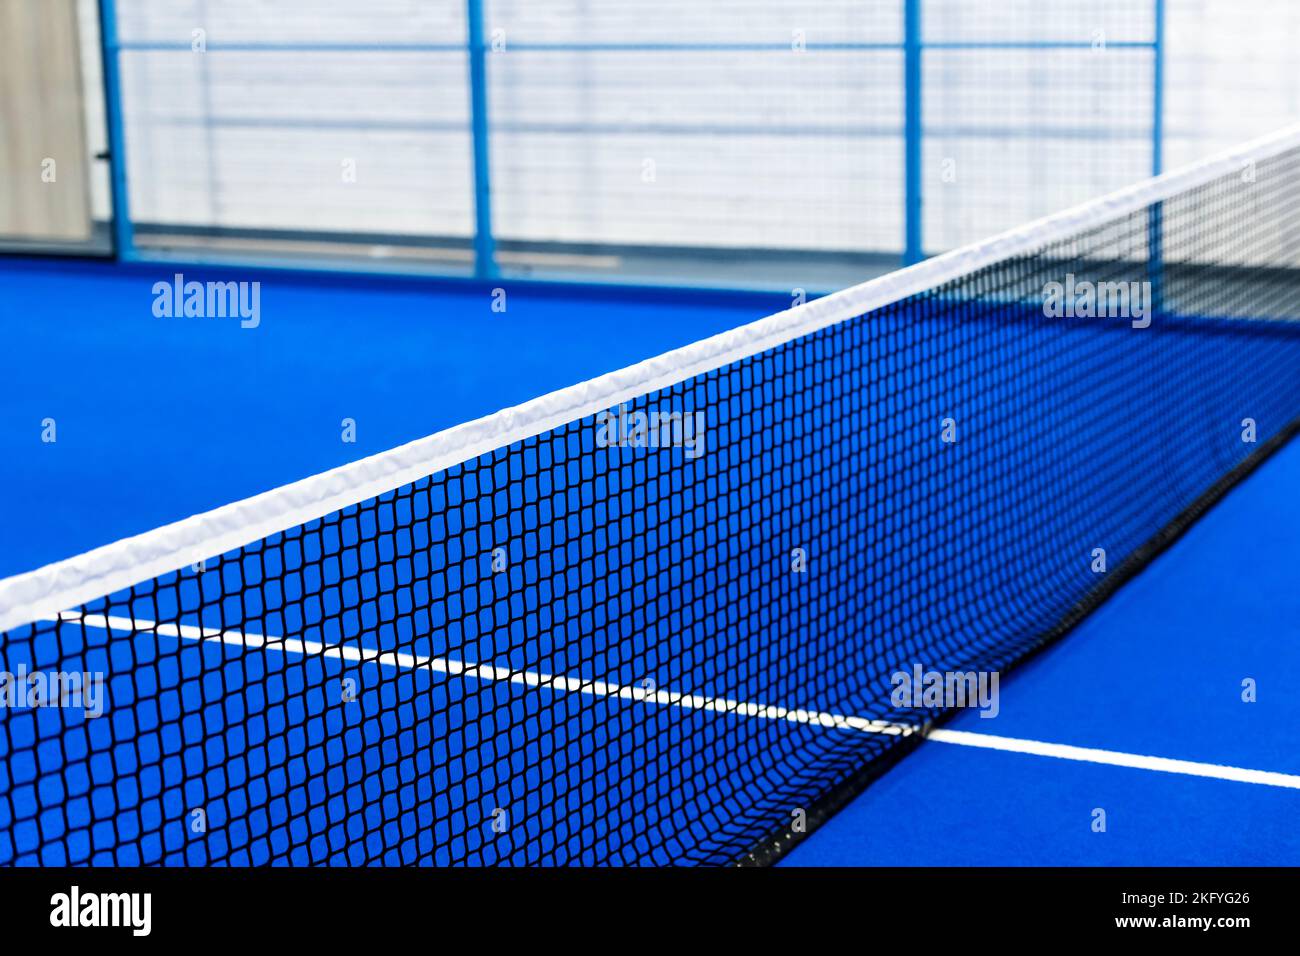 Paddle tennis and tennis net on blue court. Tennis competion concept. Horizontal sport poster, greeting cards, headers, website Stock Photo